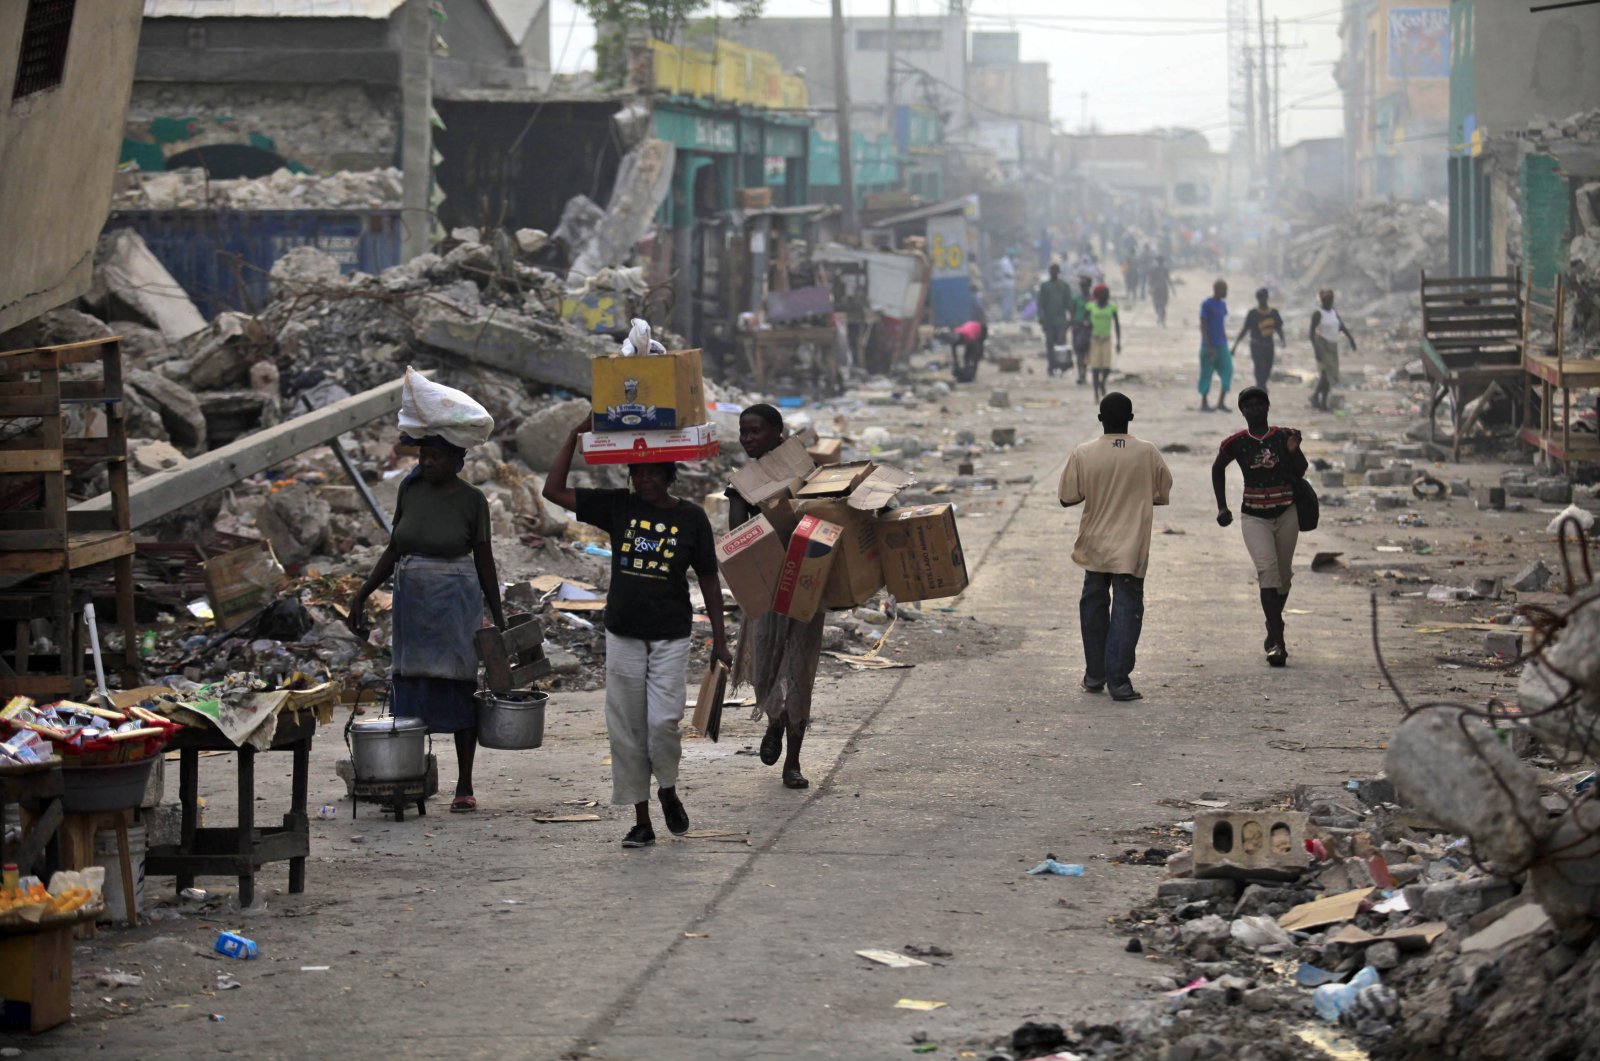 Earthquake survivors walk in a street with debris in downtown Port-au-Prince March 16, 2010. (Reuters File Photo)